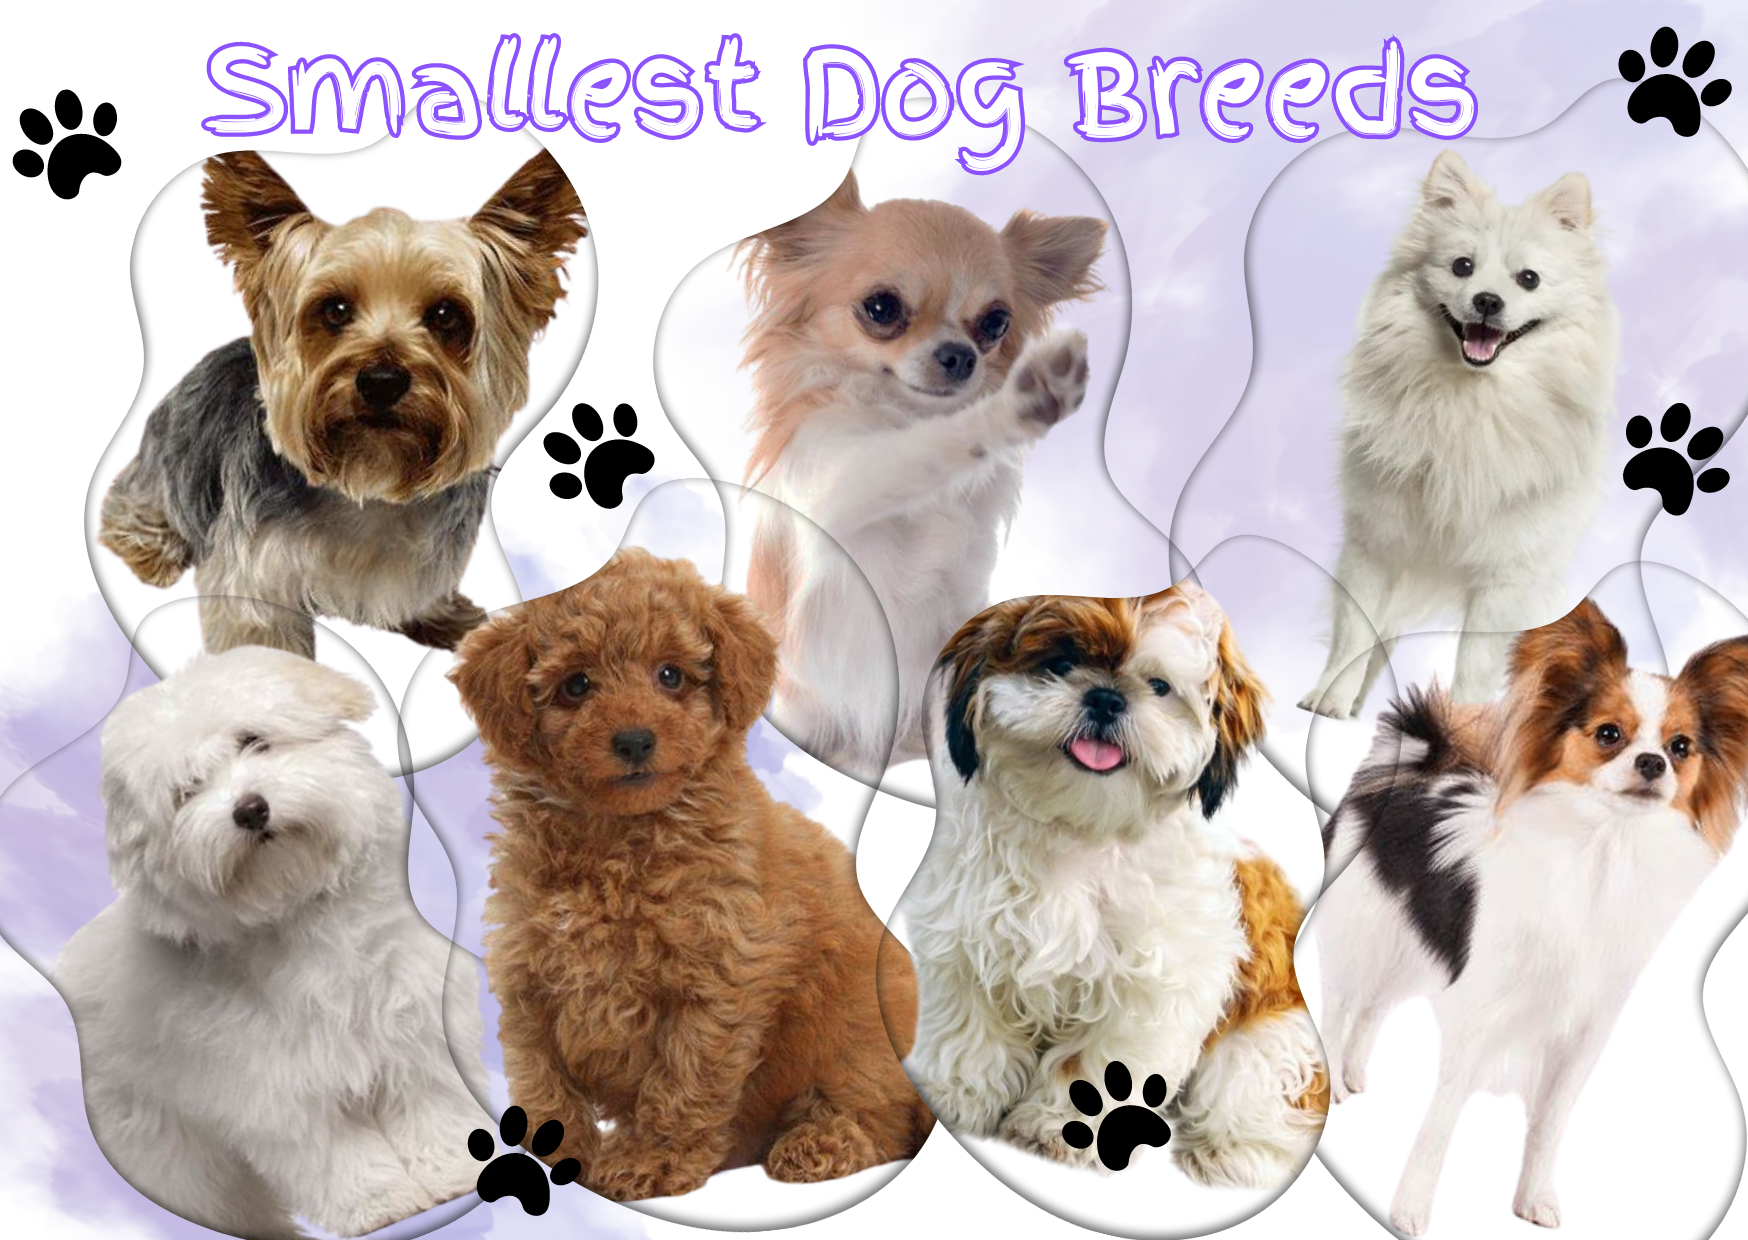 Tiny But Mighty: 7 Smallest Dog Breeds with Big Personalities